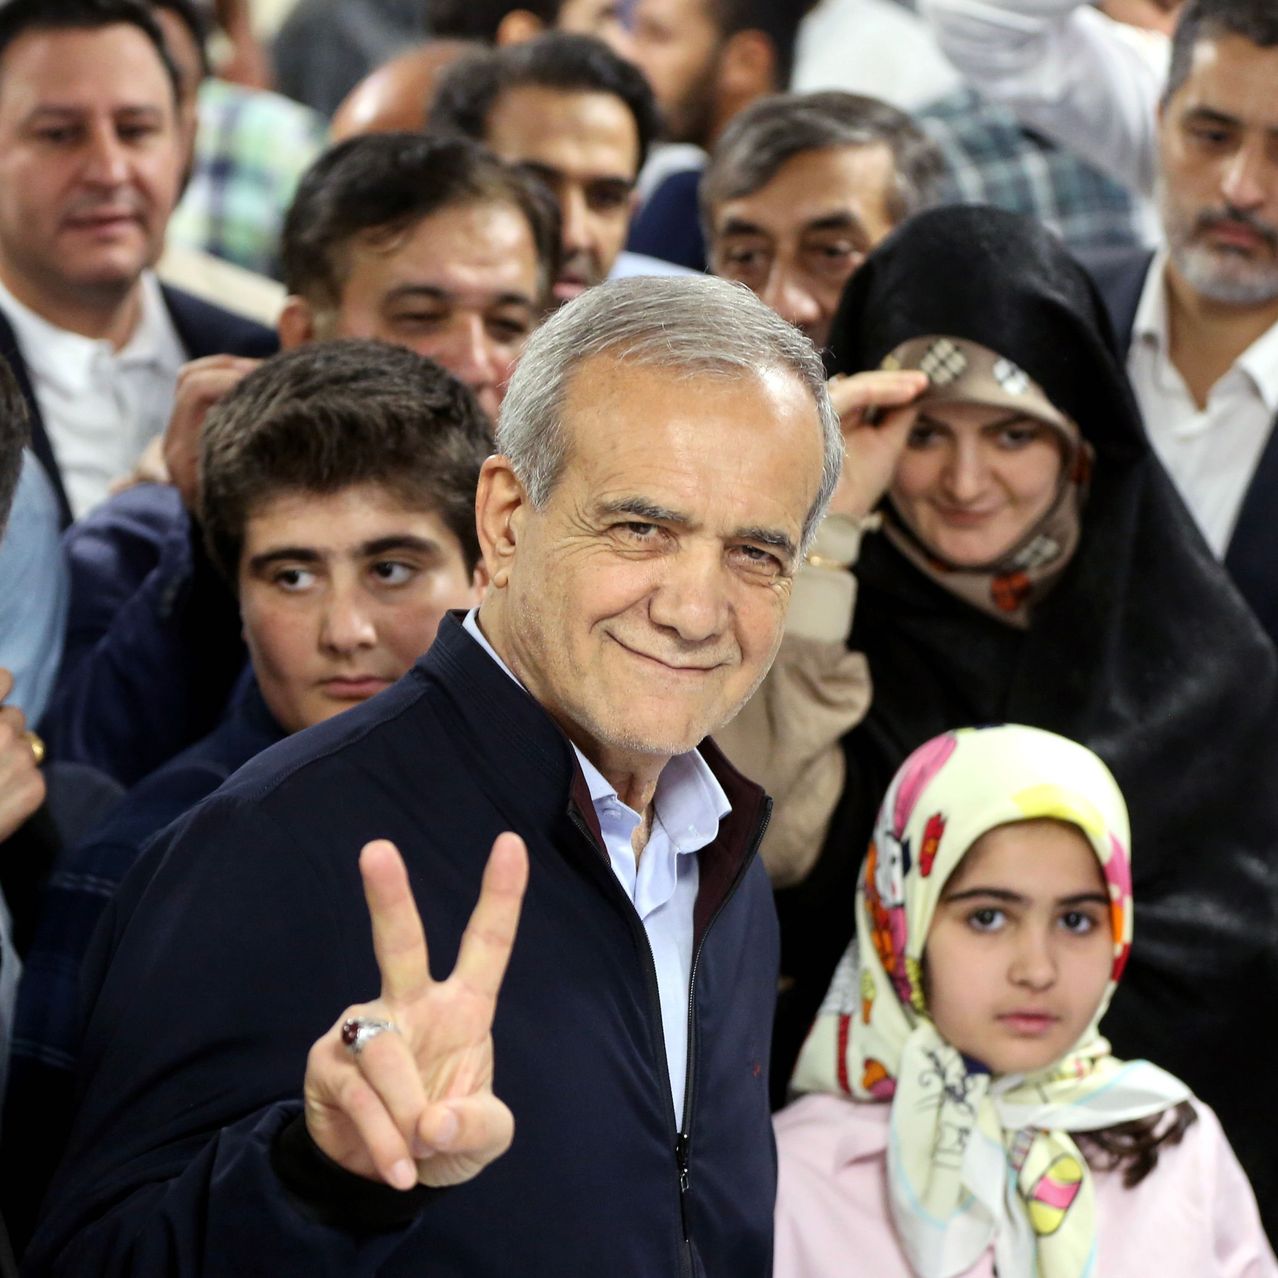 Iranian reformist presidential candidate Masoud Pezeshkian at a polling station Friday, flashing a victory sign. STRINGER/SHUTTERSTOCK